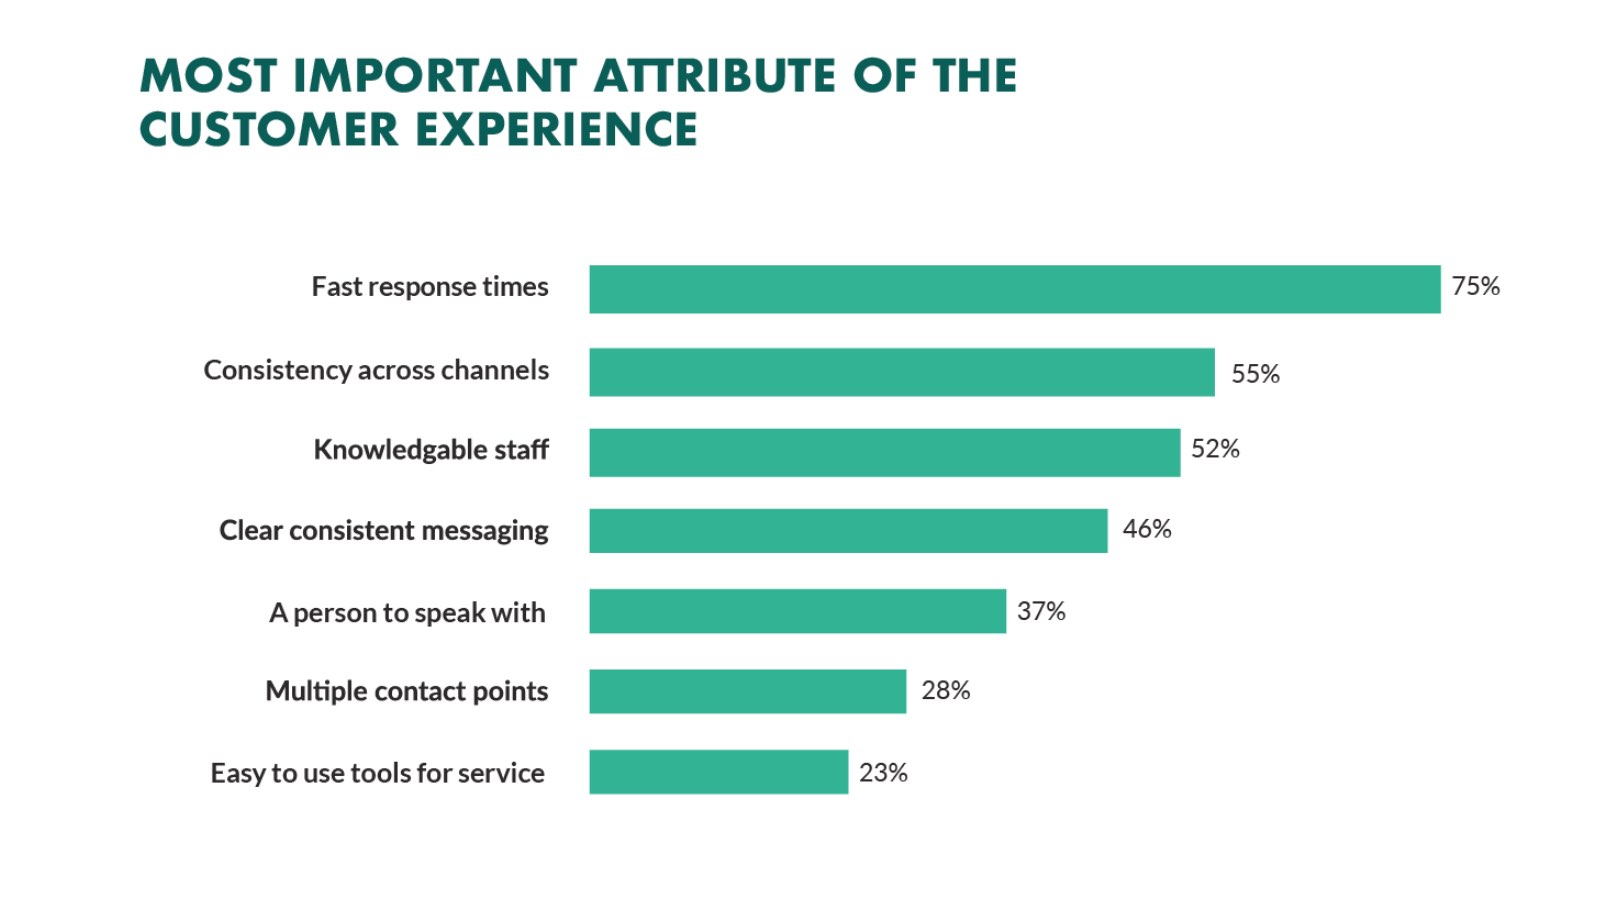 Most important attribute of the customer experience